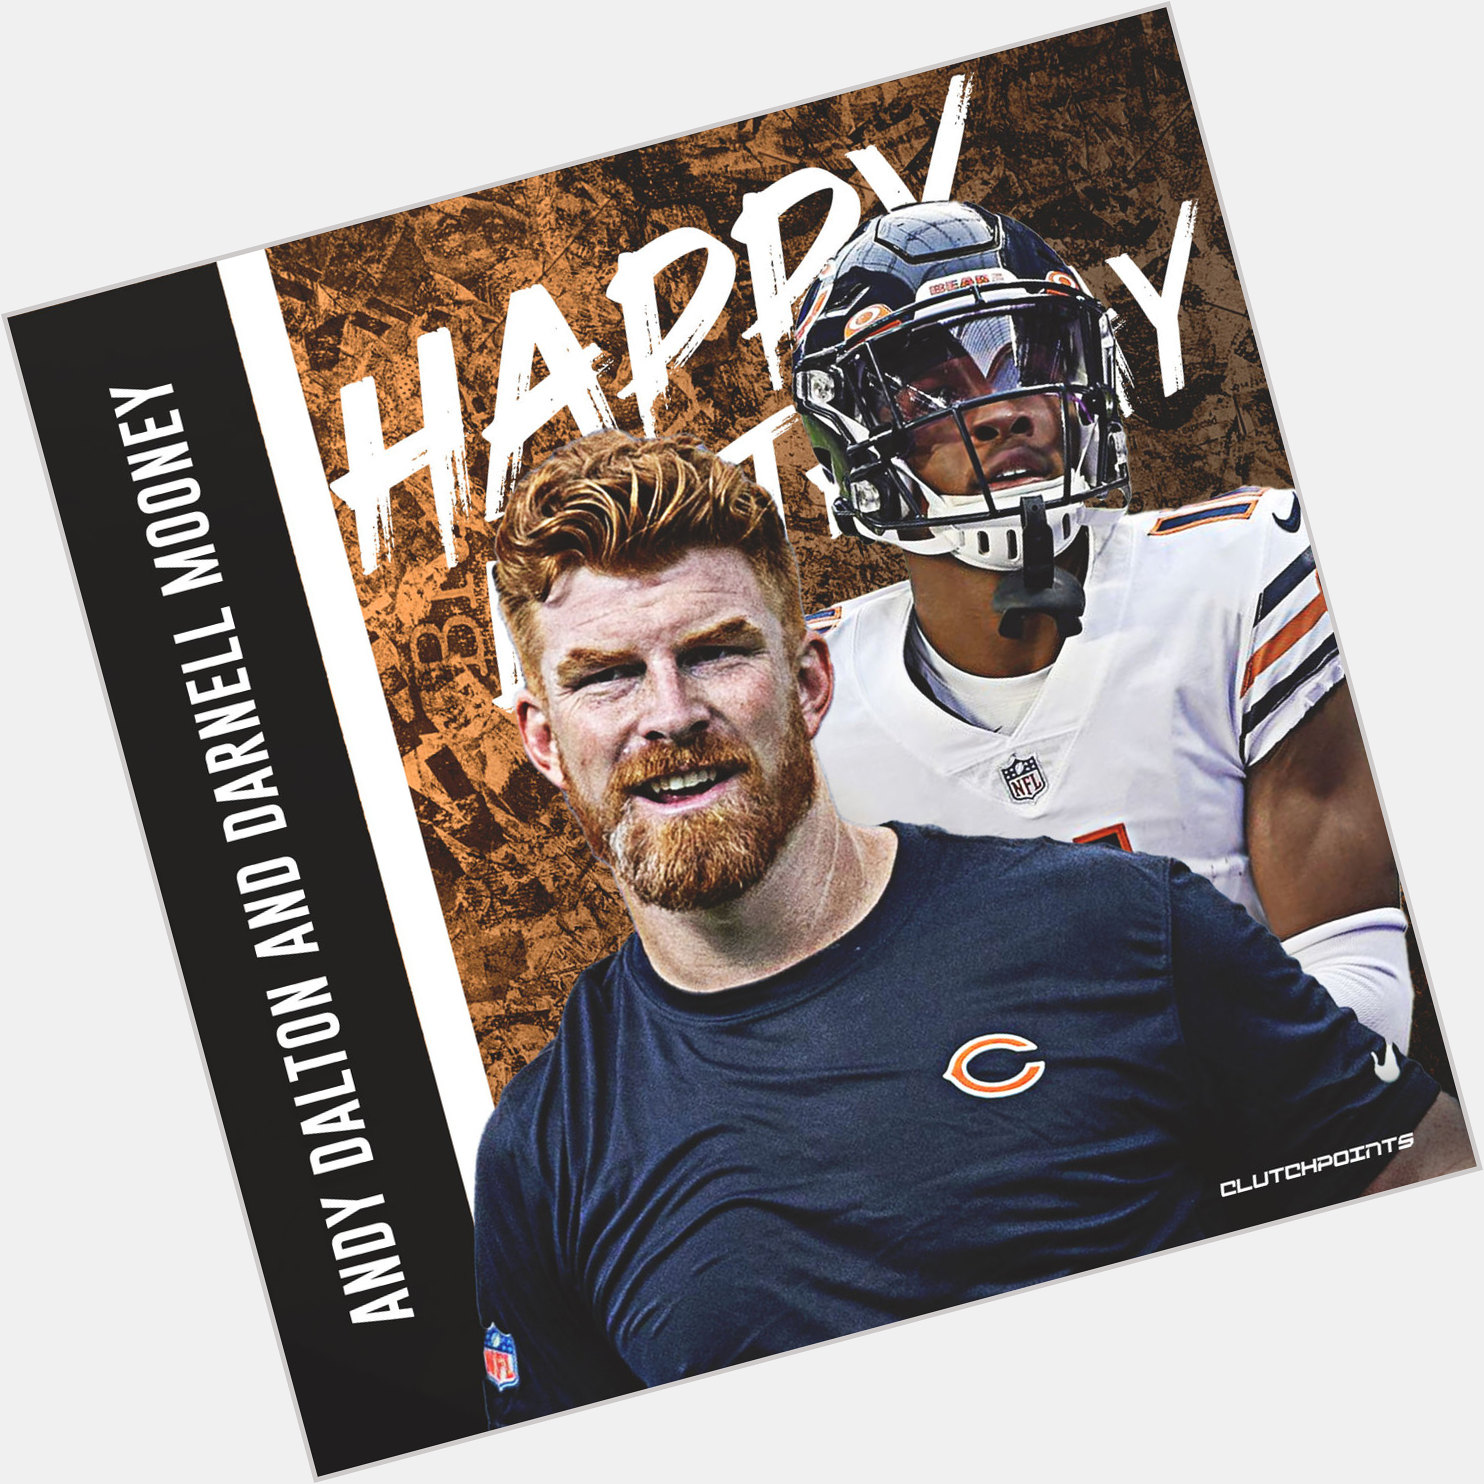 Join Bears Nation in greeting both Andy Dalton (34th) and Darnell Mooney (24th) a happy birthday today!  